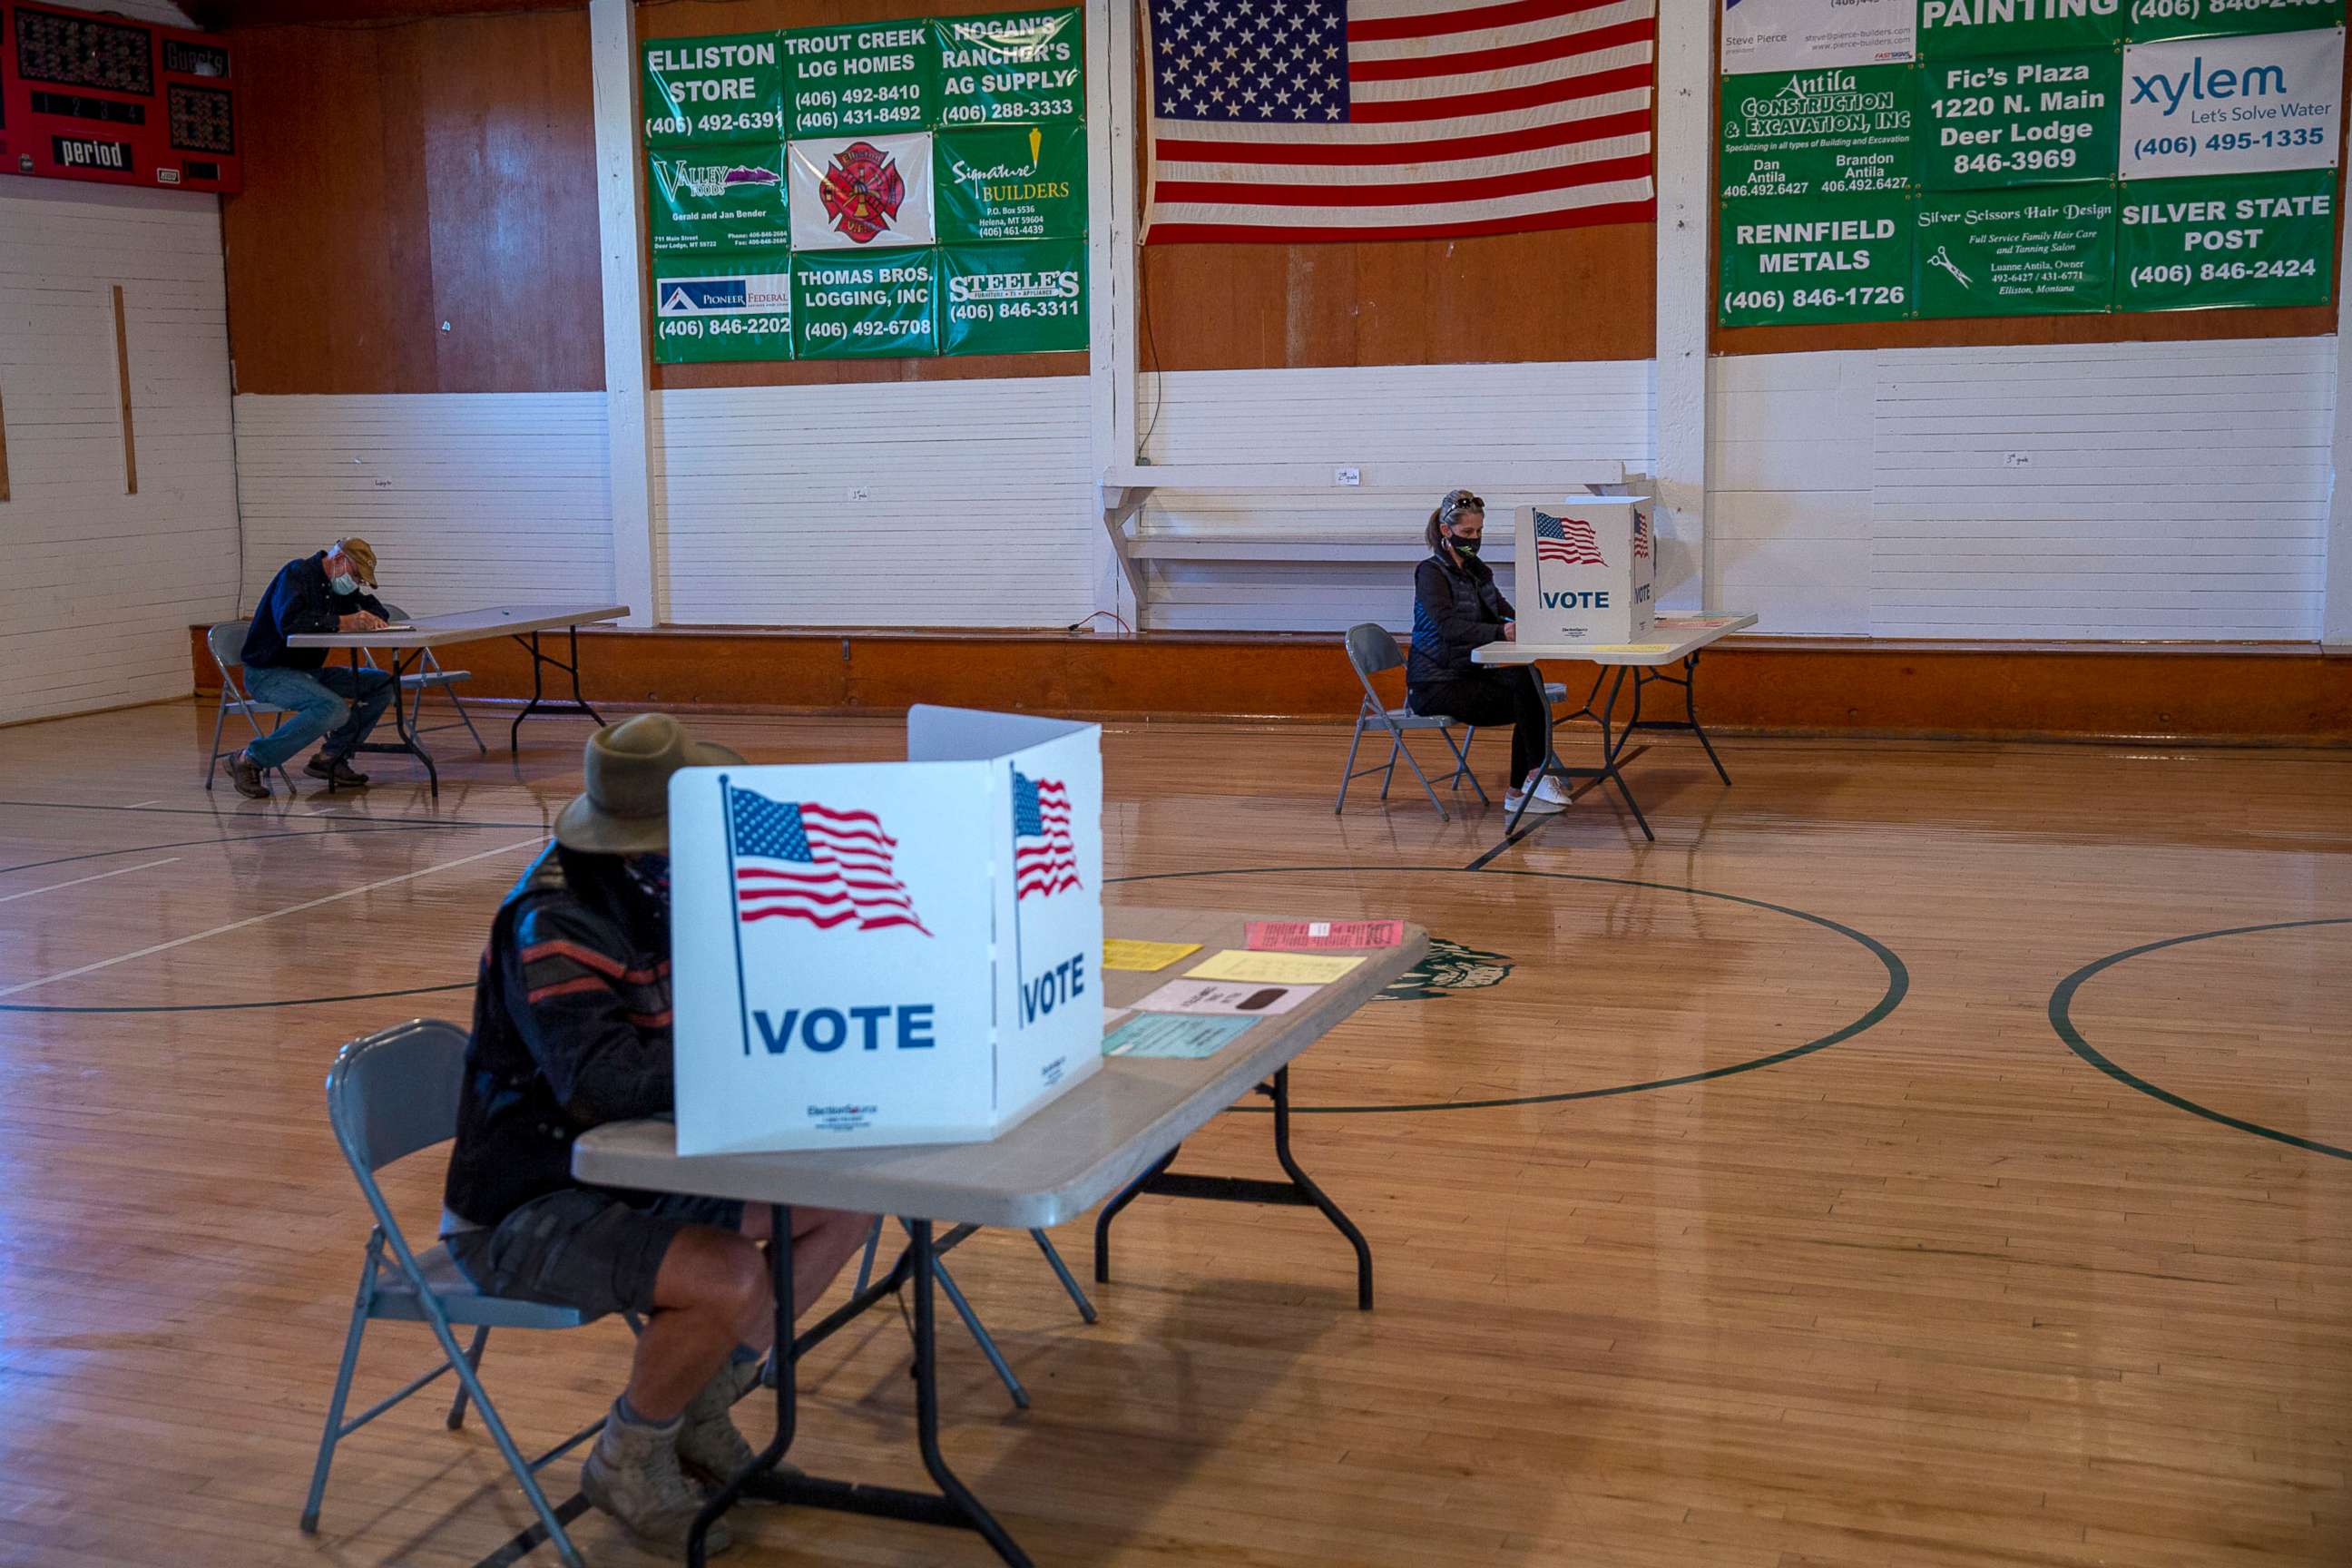 PHOTO: Voters inside the polling location in Elliston, Montana, on Election Day, November 3, 2020.